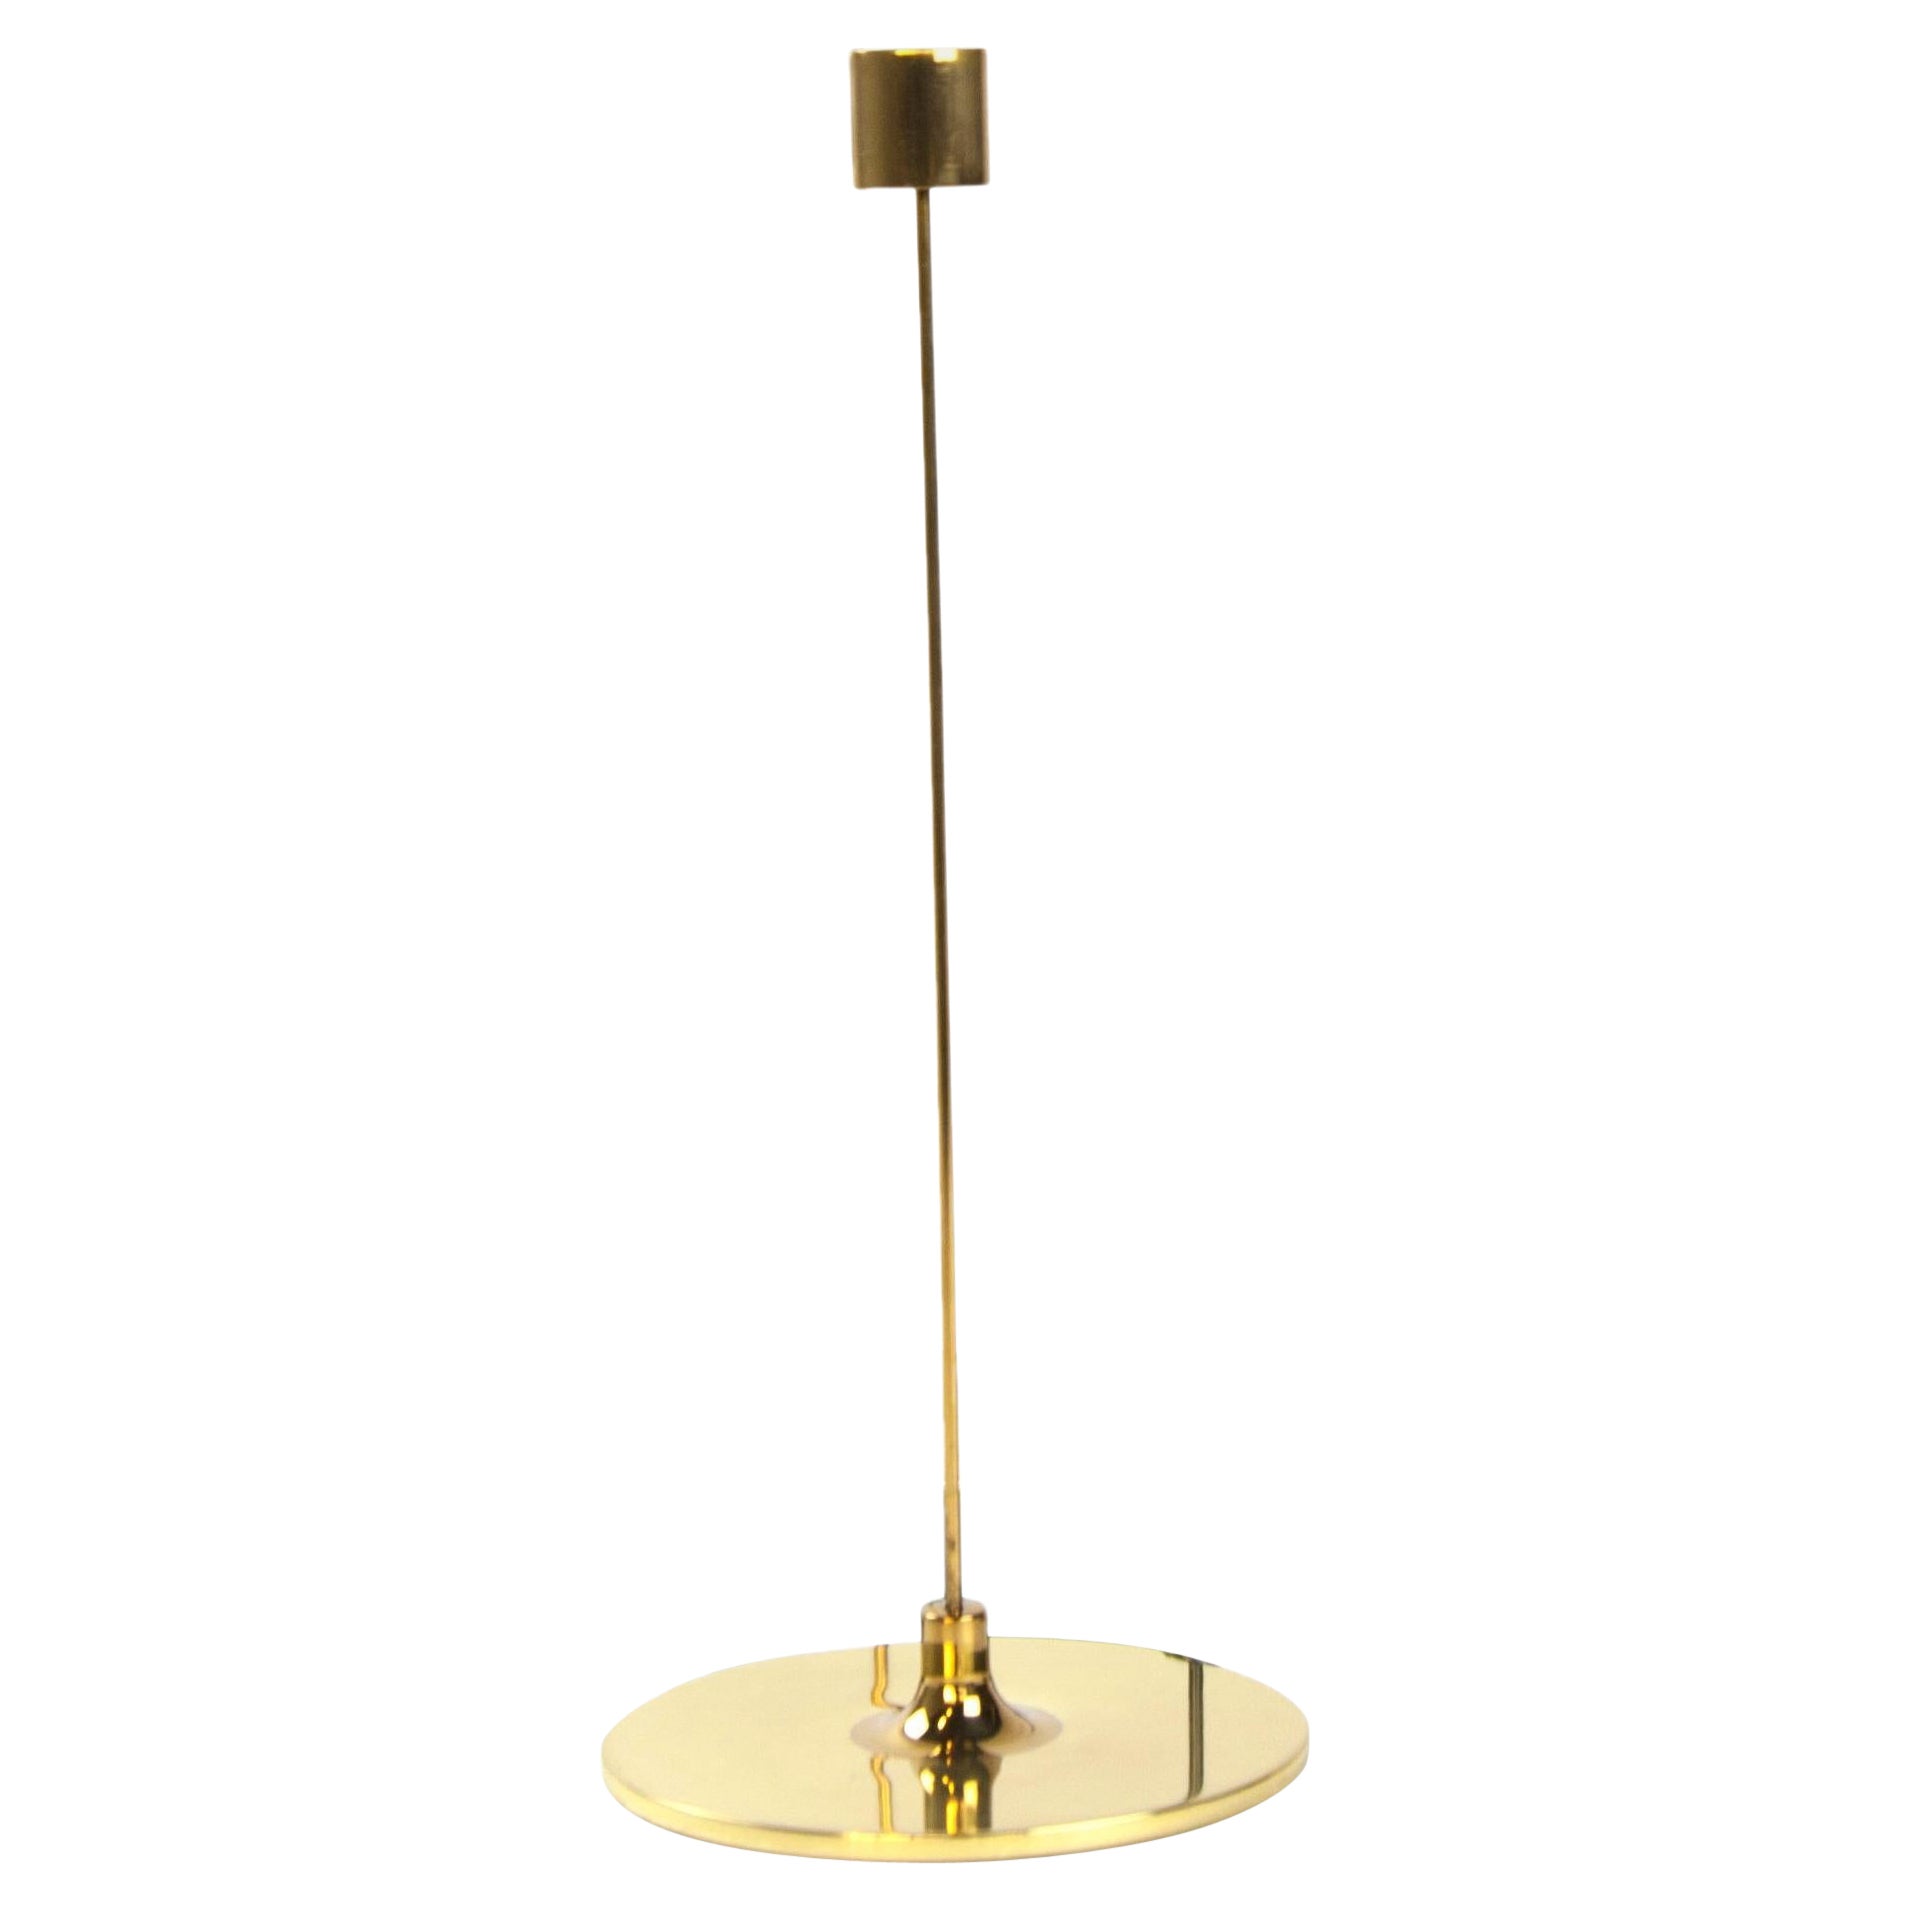 Small Pin Brass Candlestick by Gentner Design